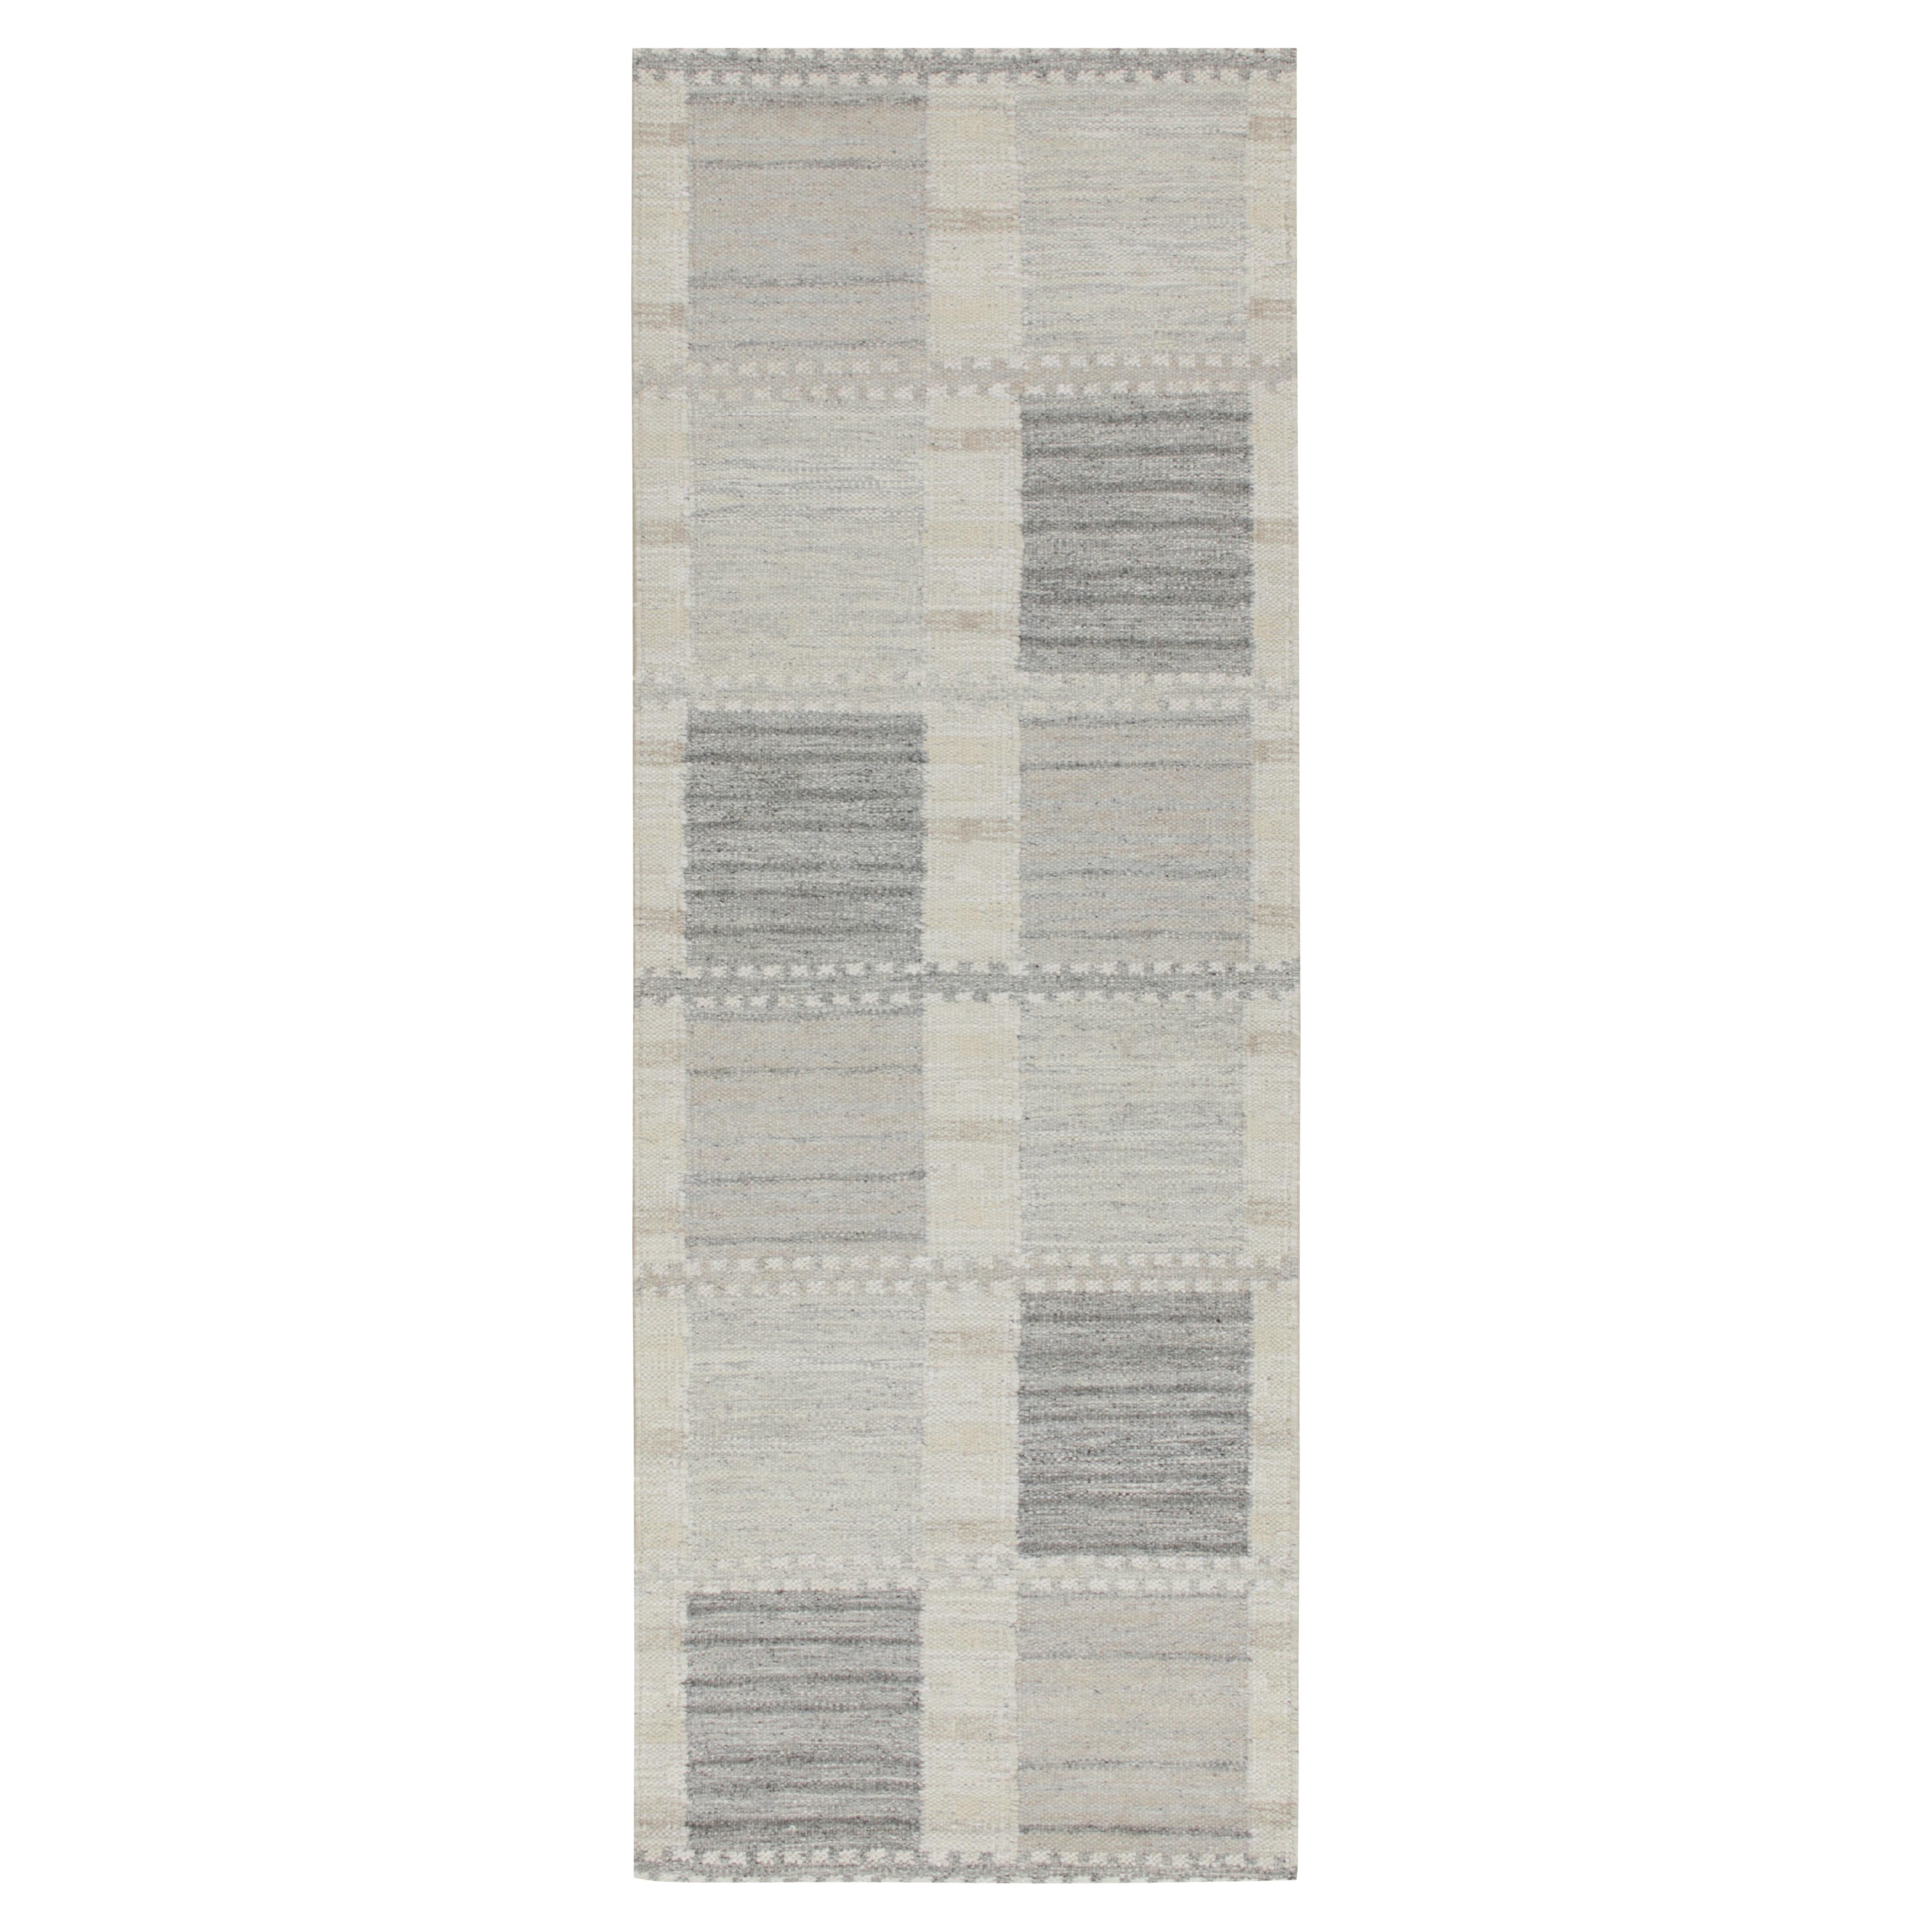 Rug & Kilim’s Scandinavian Style Kilim runner with Patterns in White & Grey For Sale